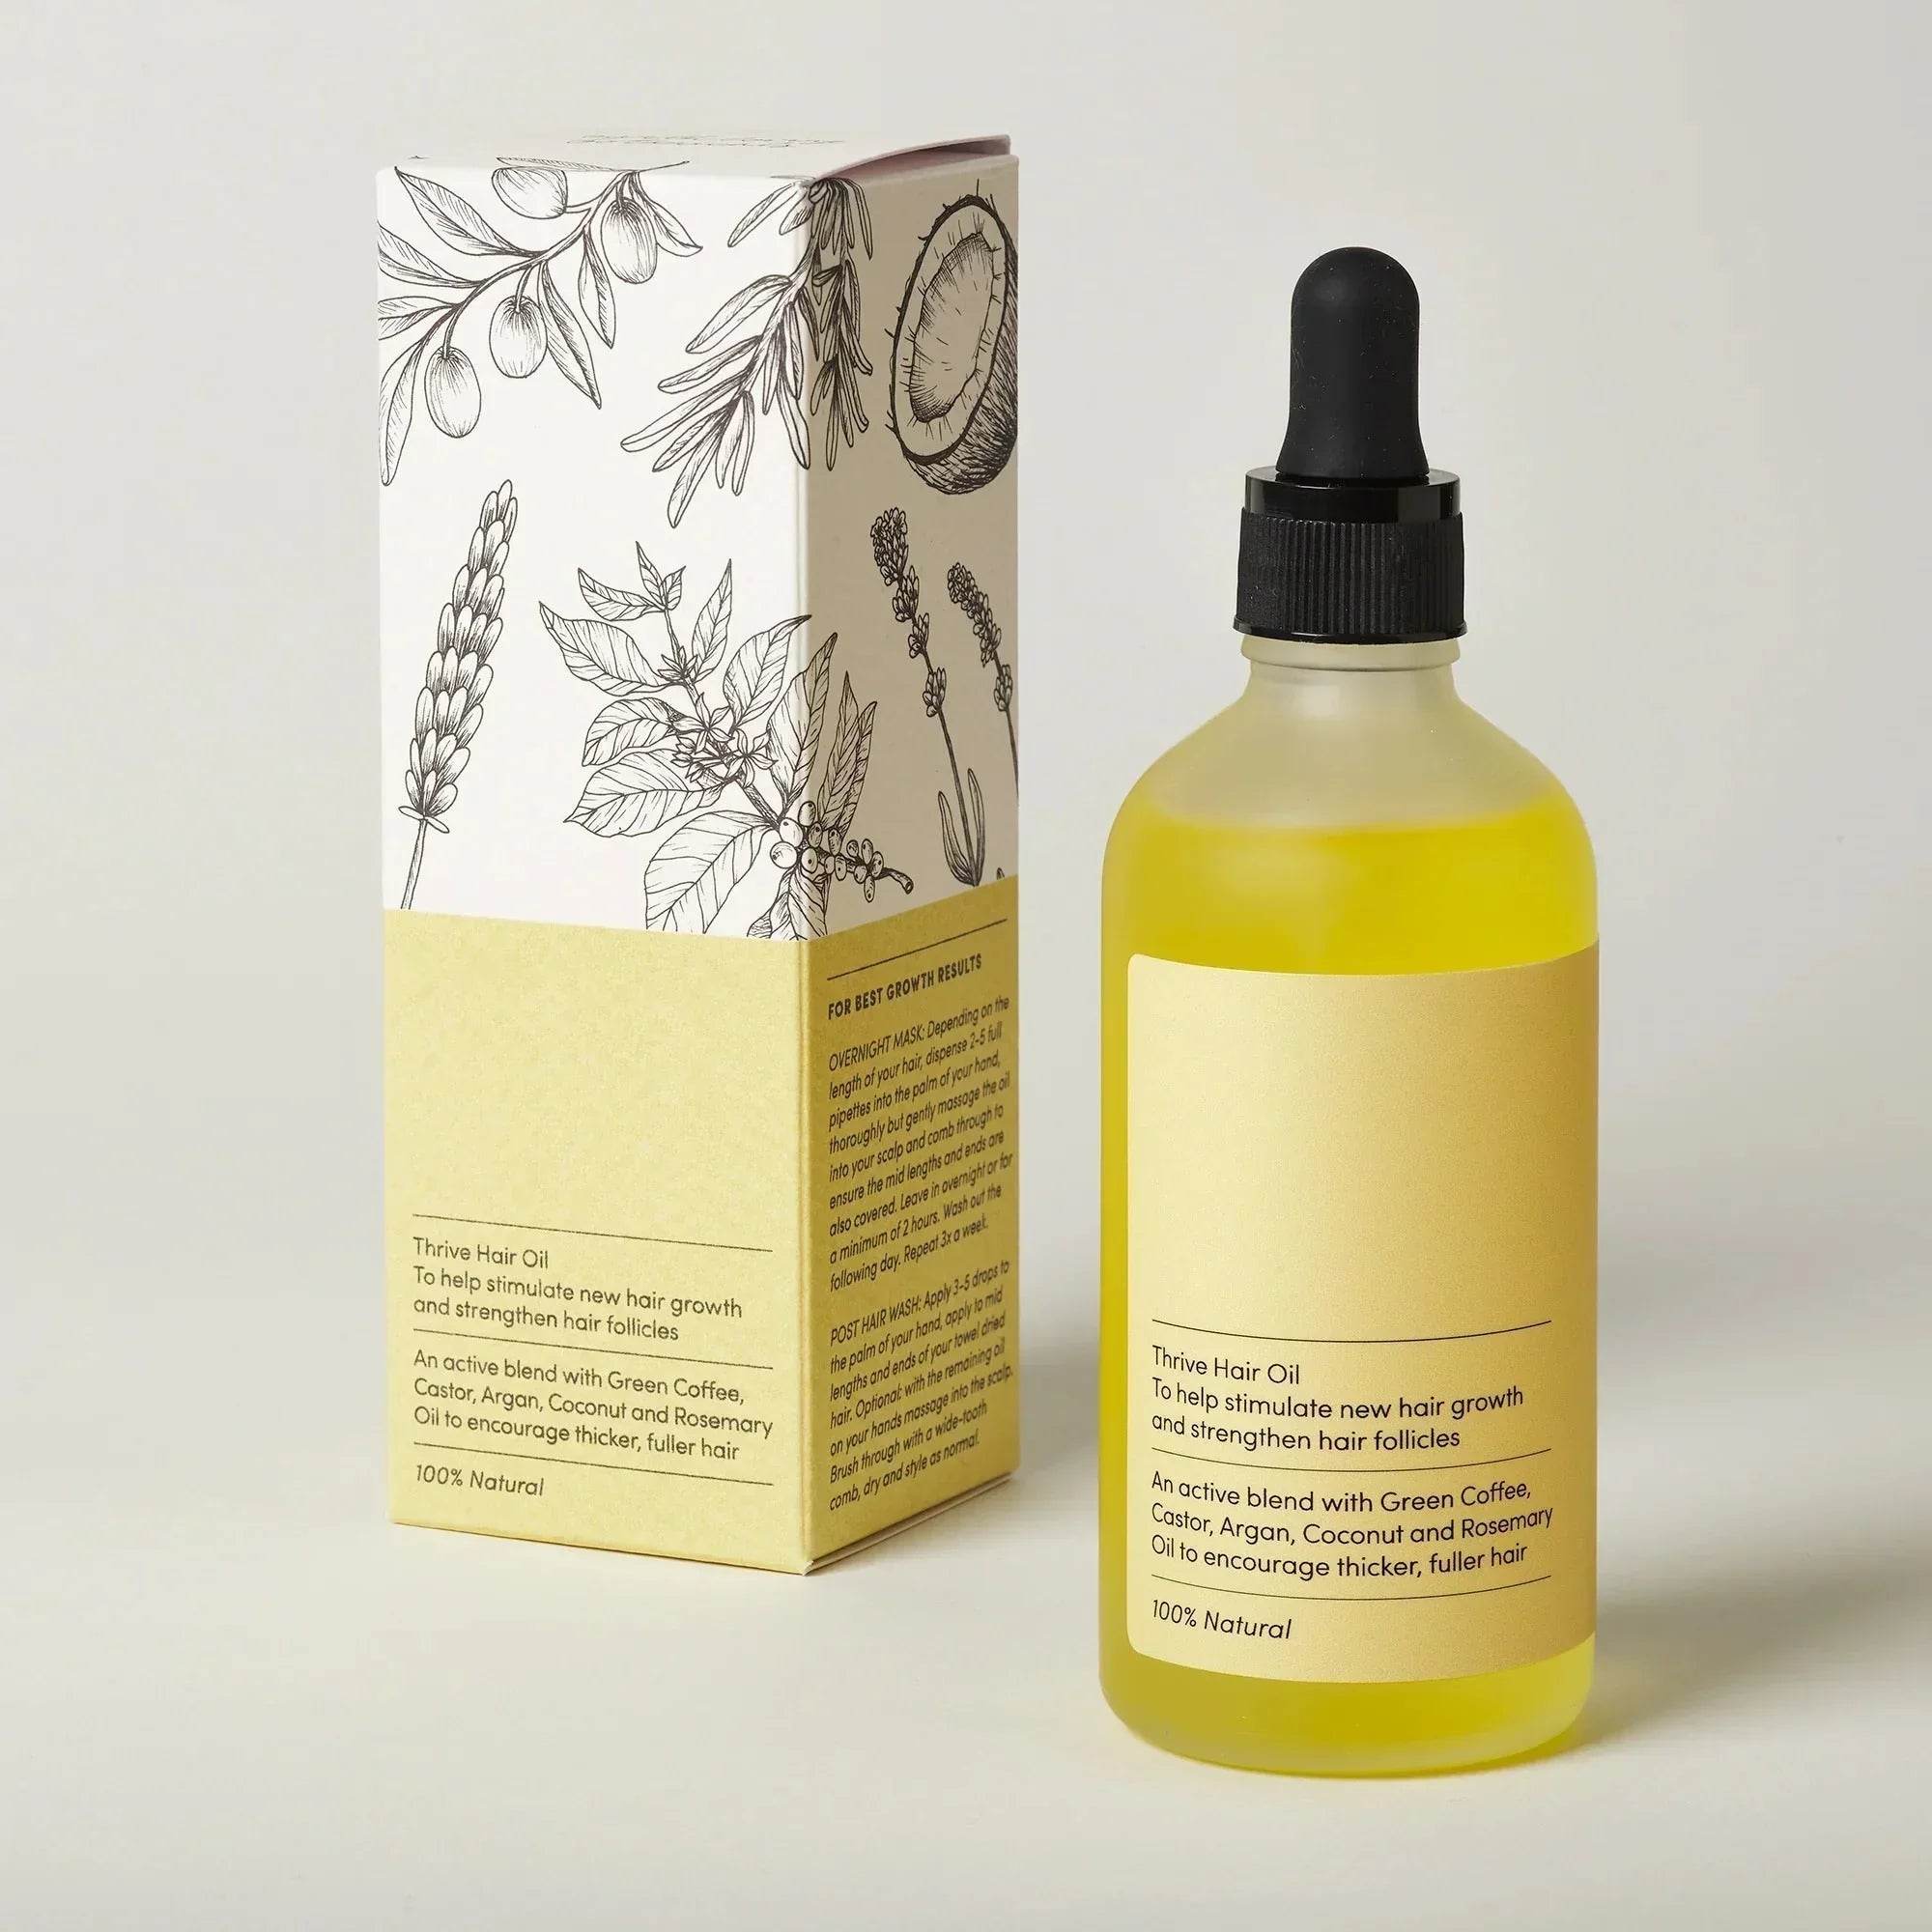 Additional Hair Growth Oil -  One Time Promotional Offer $20